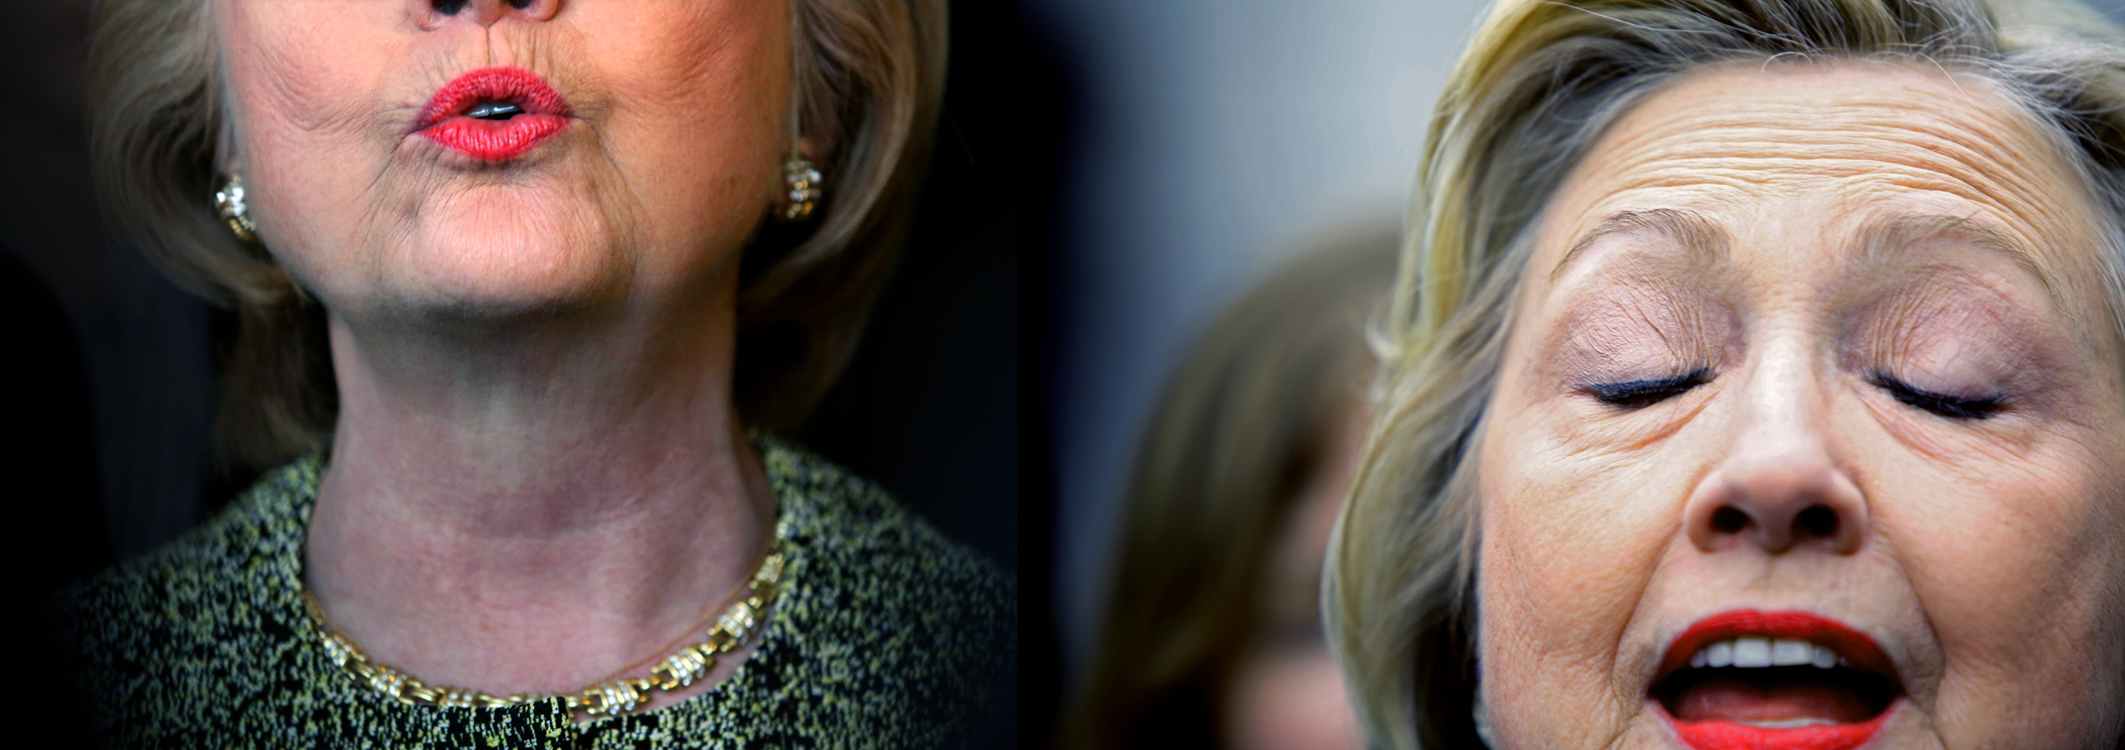 (L-R) U.S. Presidential candidate Hillary Clinton (D-NY) speaks at Jackson Diner in Queens, NY, on April 11, 2016; and campaigns near Yankee Stadium in the Bronx earlier that same day. (For Washington Post)